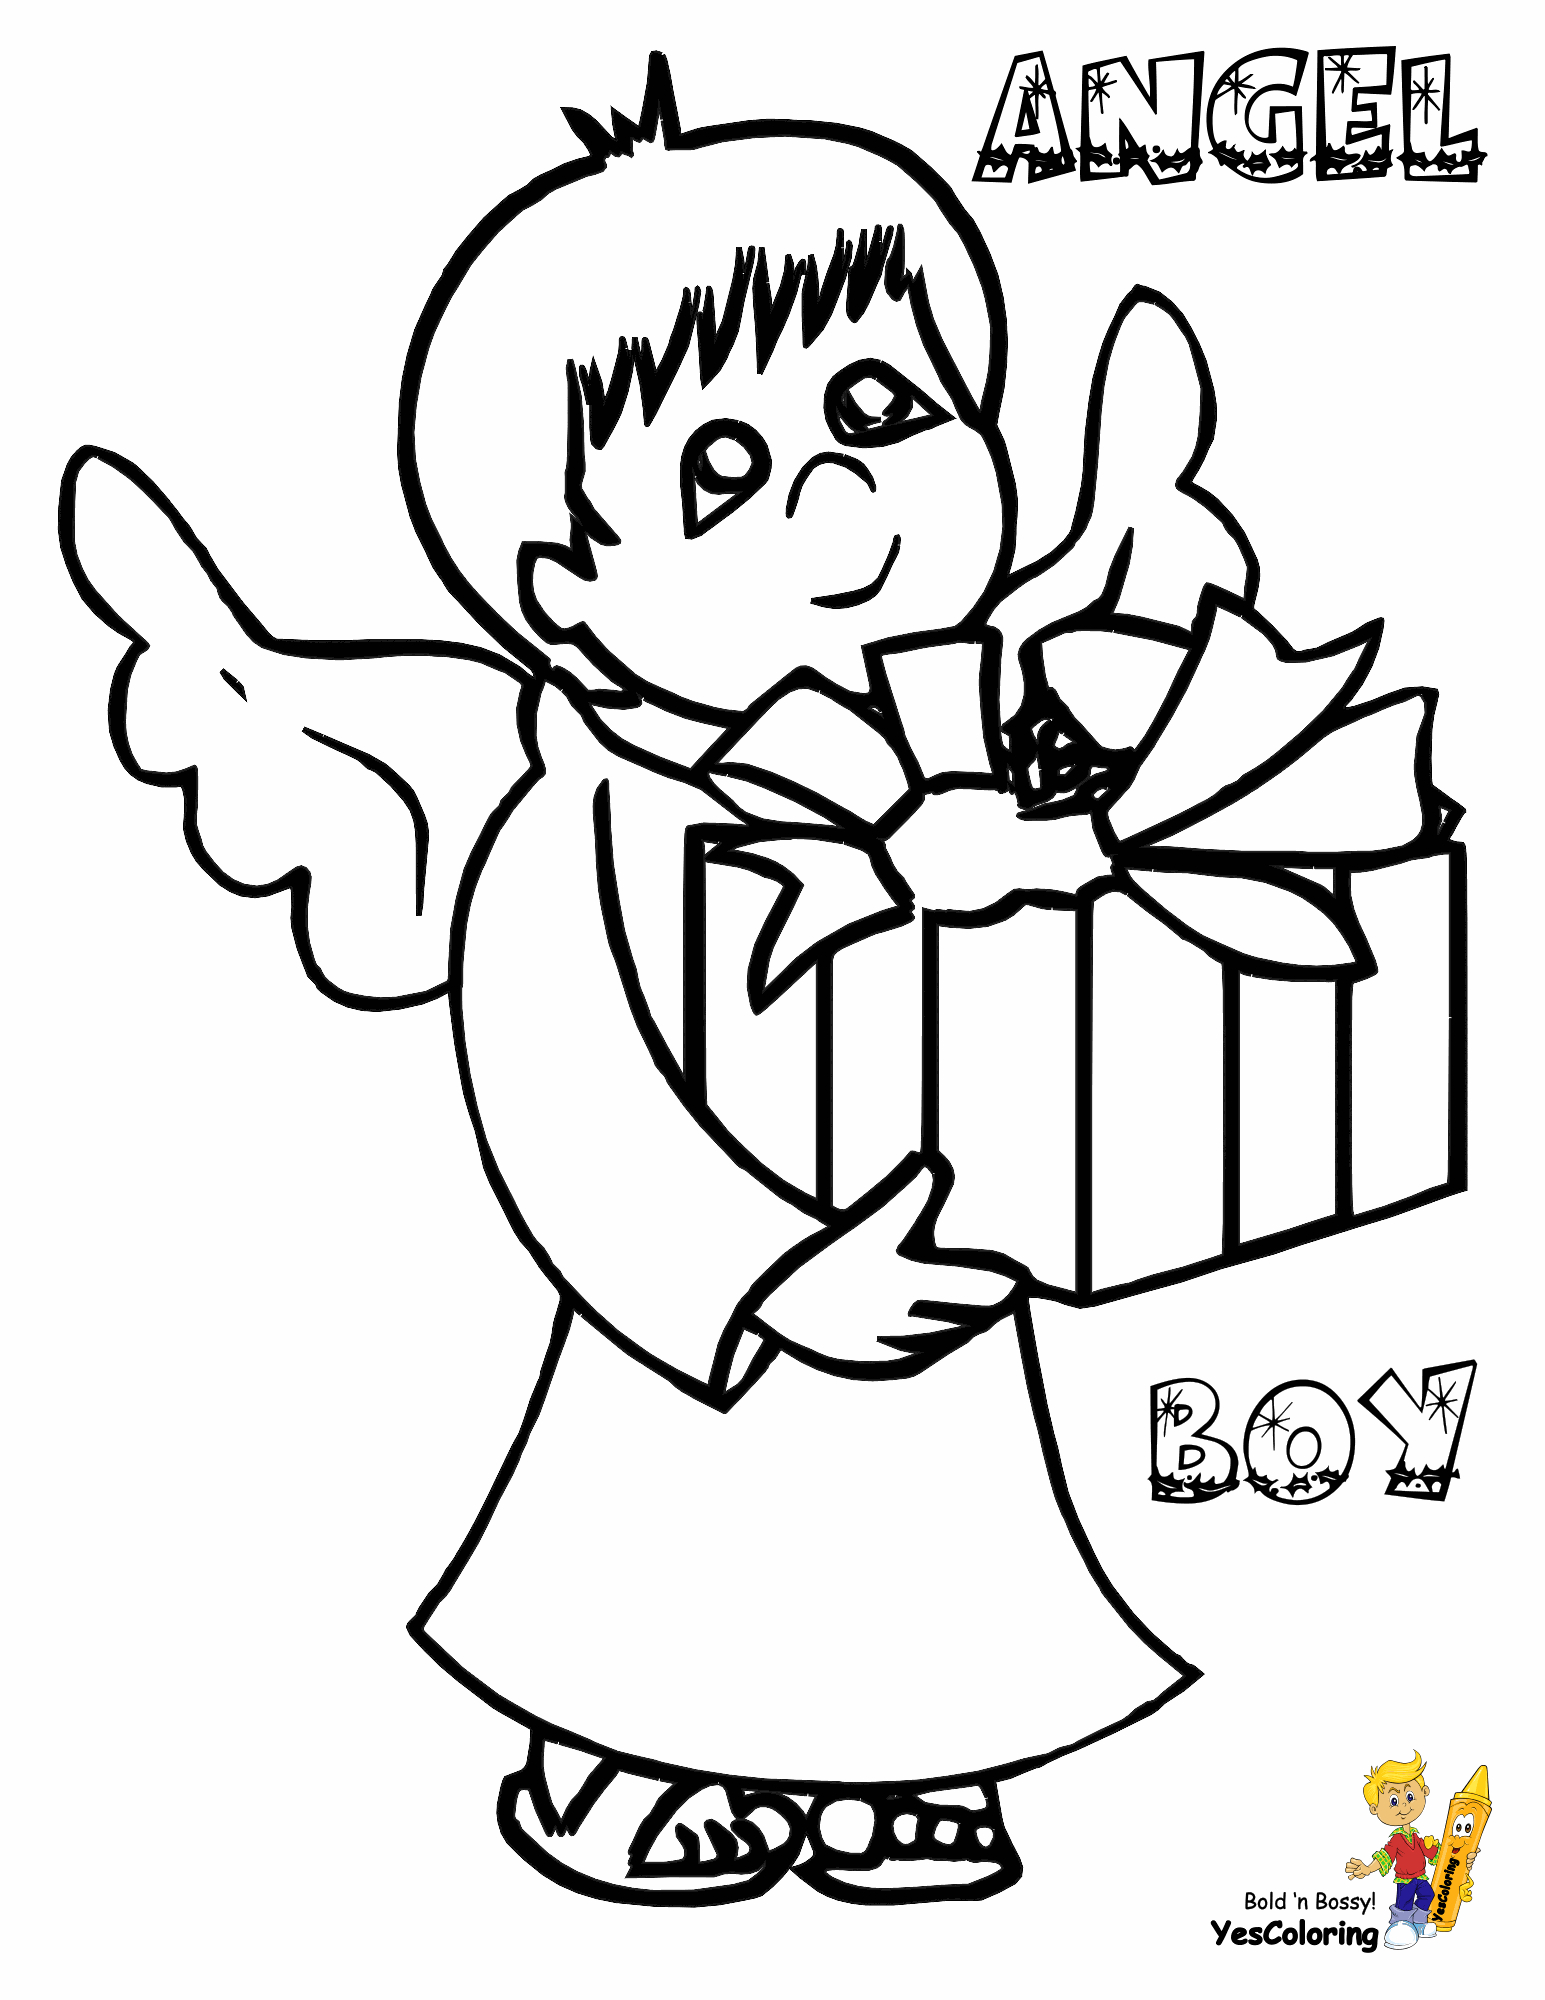 Jesus Christmas Coloring Pages Coloring Pages Cool Coloring Pages To Print Christmas Free Jesus